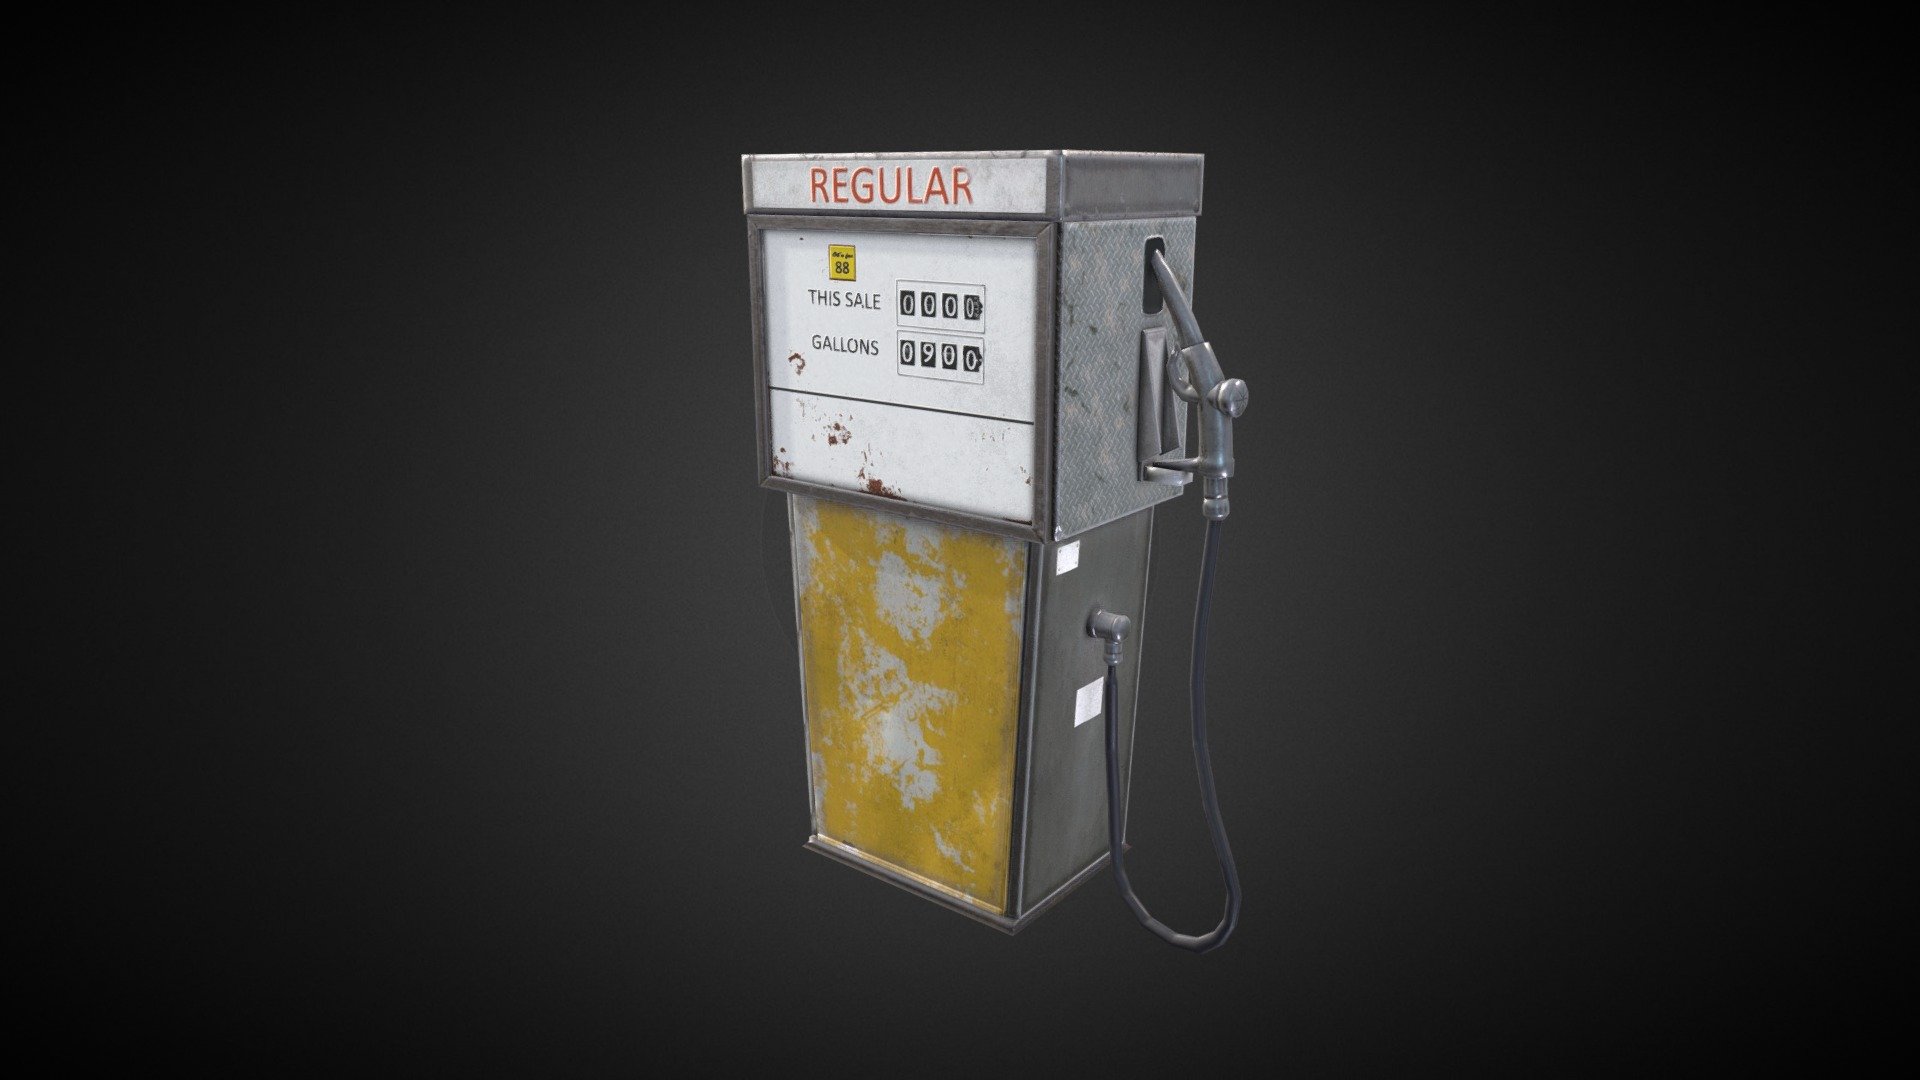 Old Gas Pump. Abandoned in the desert. All Alone. Sad. Forever stuck at 0900 Gallons. 

Single prop from an old abandoned gas station in the desert. 
Modelled in 3Ds Max and Modo, Zbrush and painted in Substance.

Hope you like it 3d model